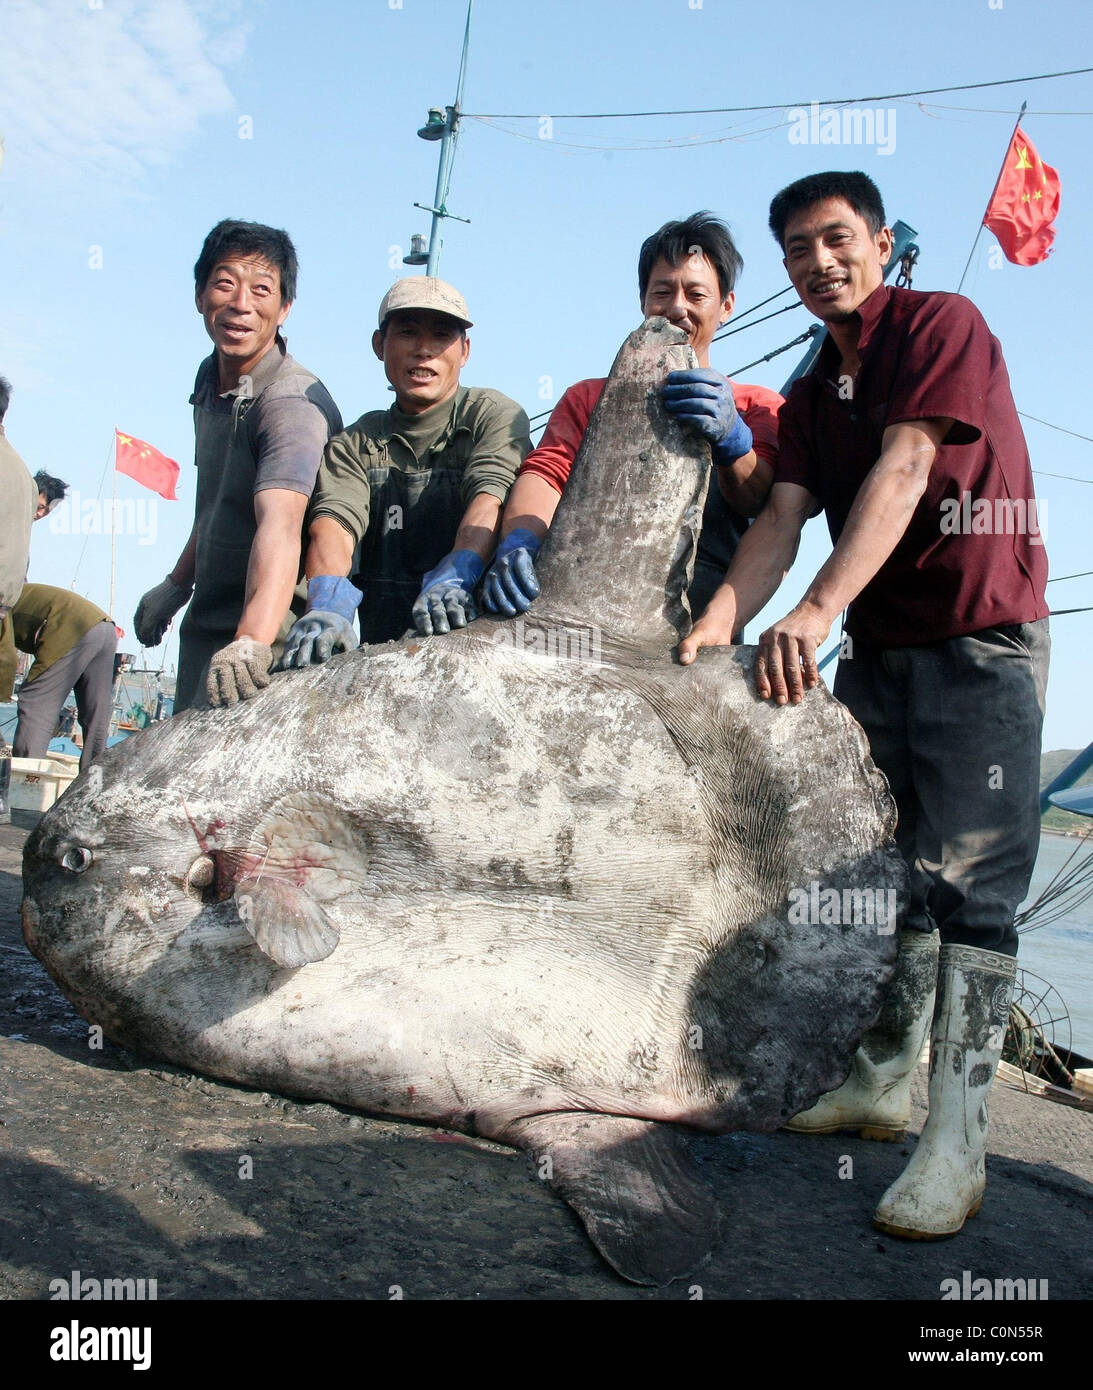 BIG FISH IS PRIZE CATCH What a whopper! Fishermen off the coast of China  netted a monster – a giant pomfret weighing 275 pounds Stock Photo - Alamy